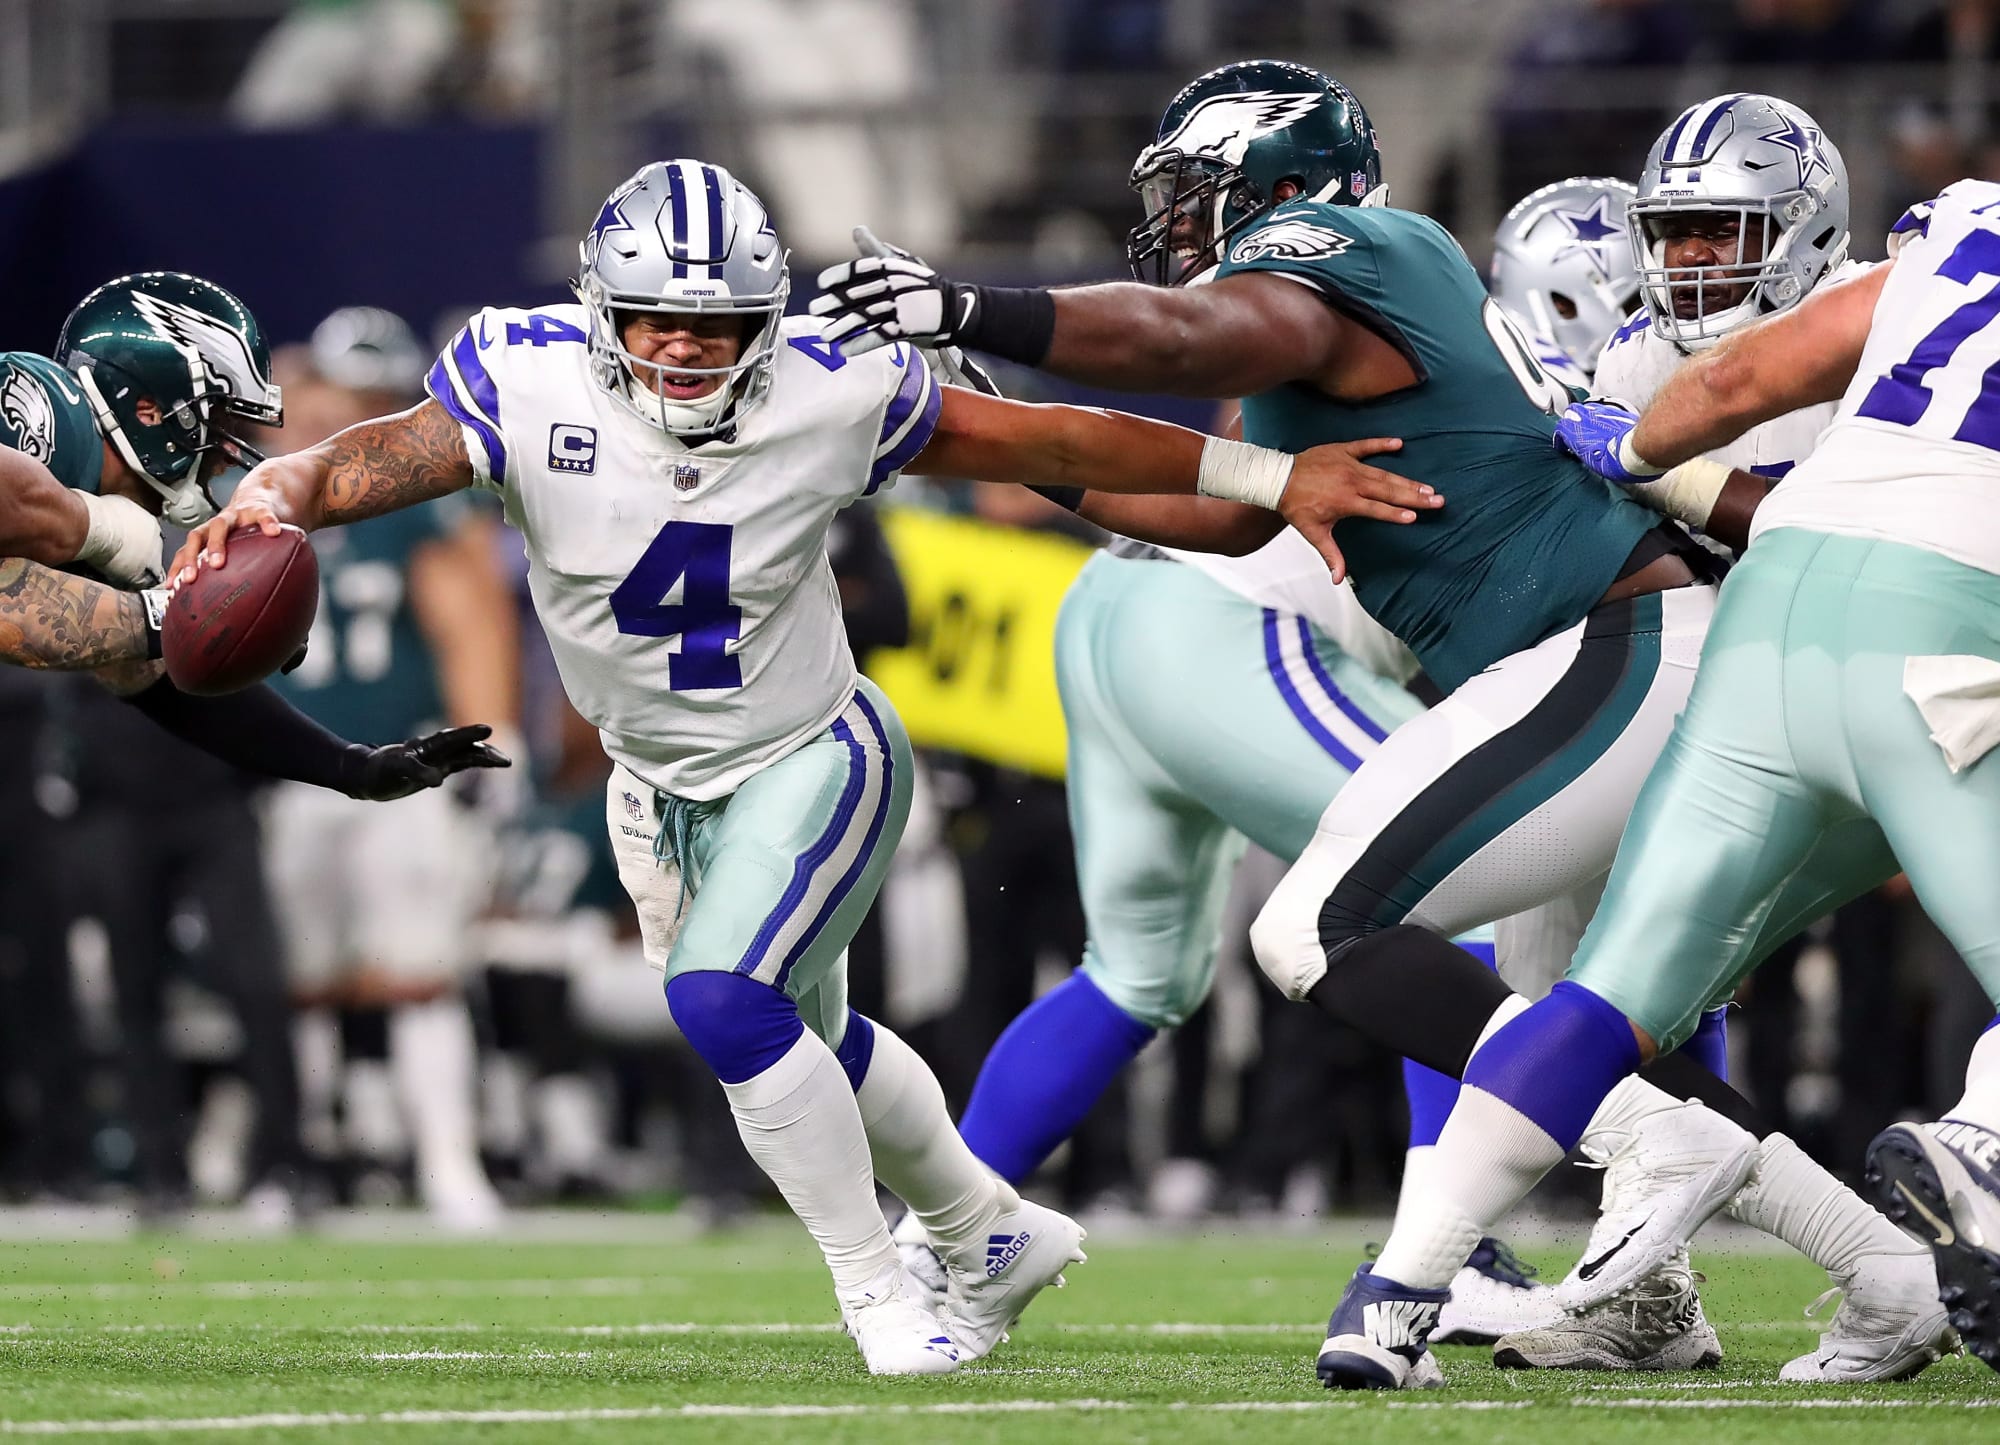 Dallas Cowboys lack offensive firepower in loss to Eagles, 37-9